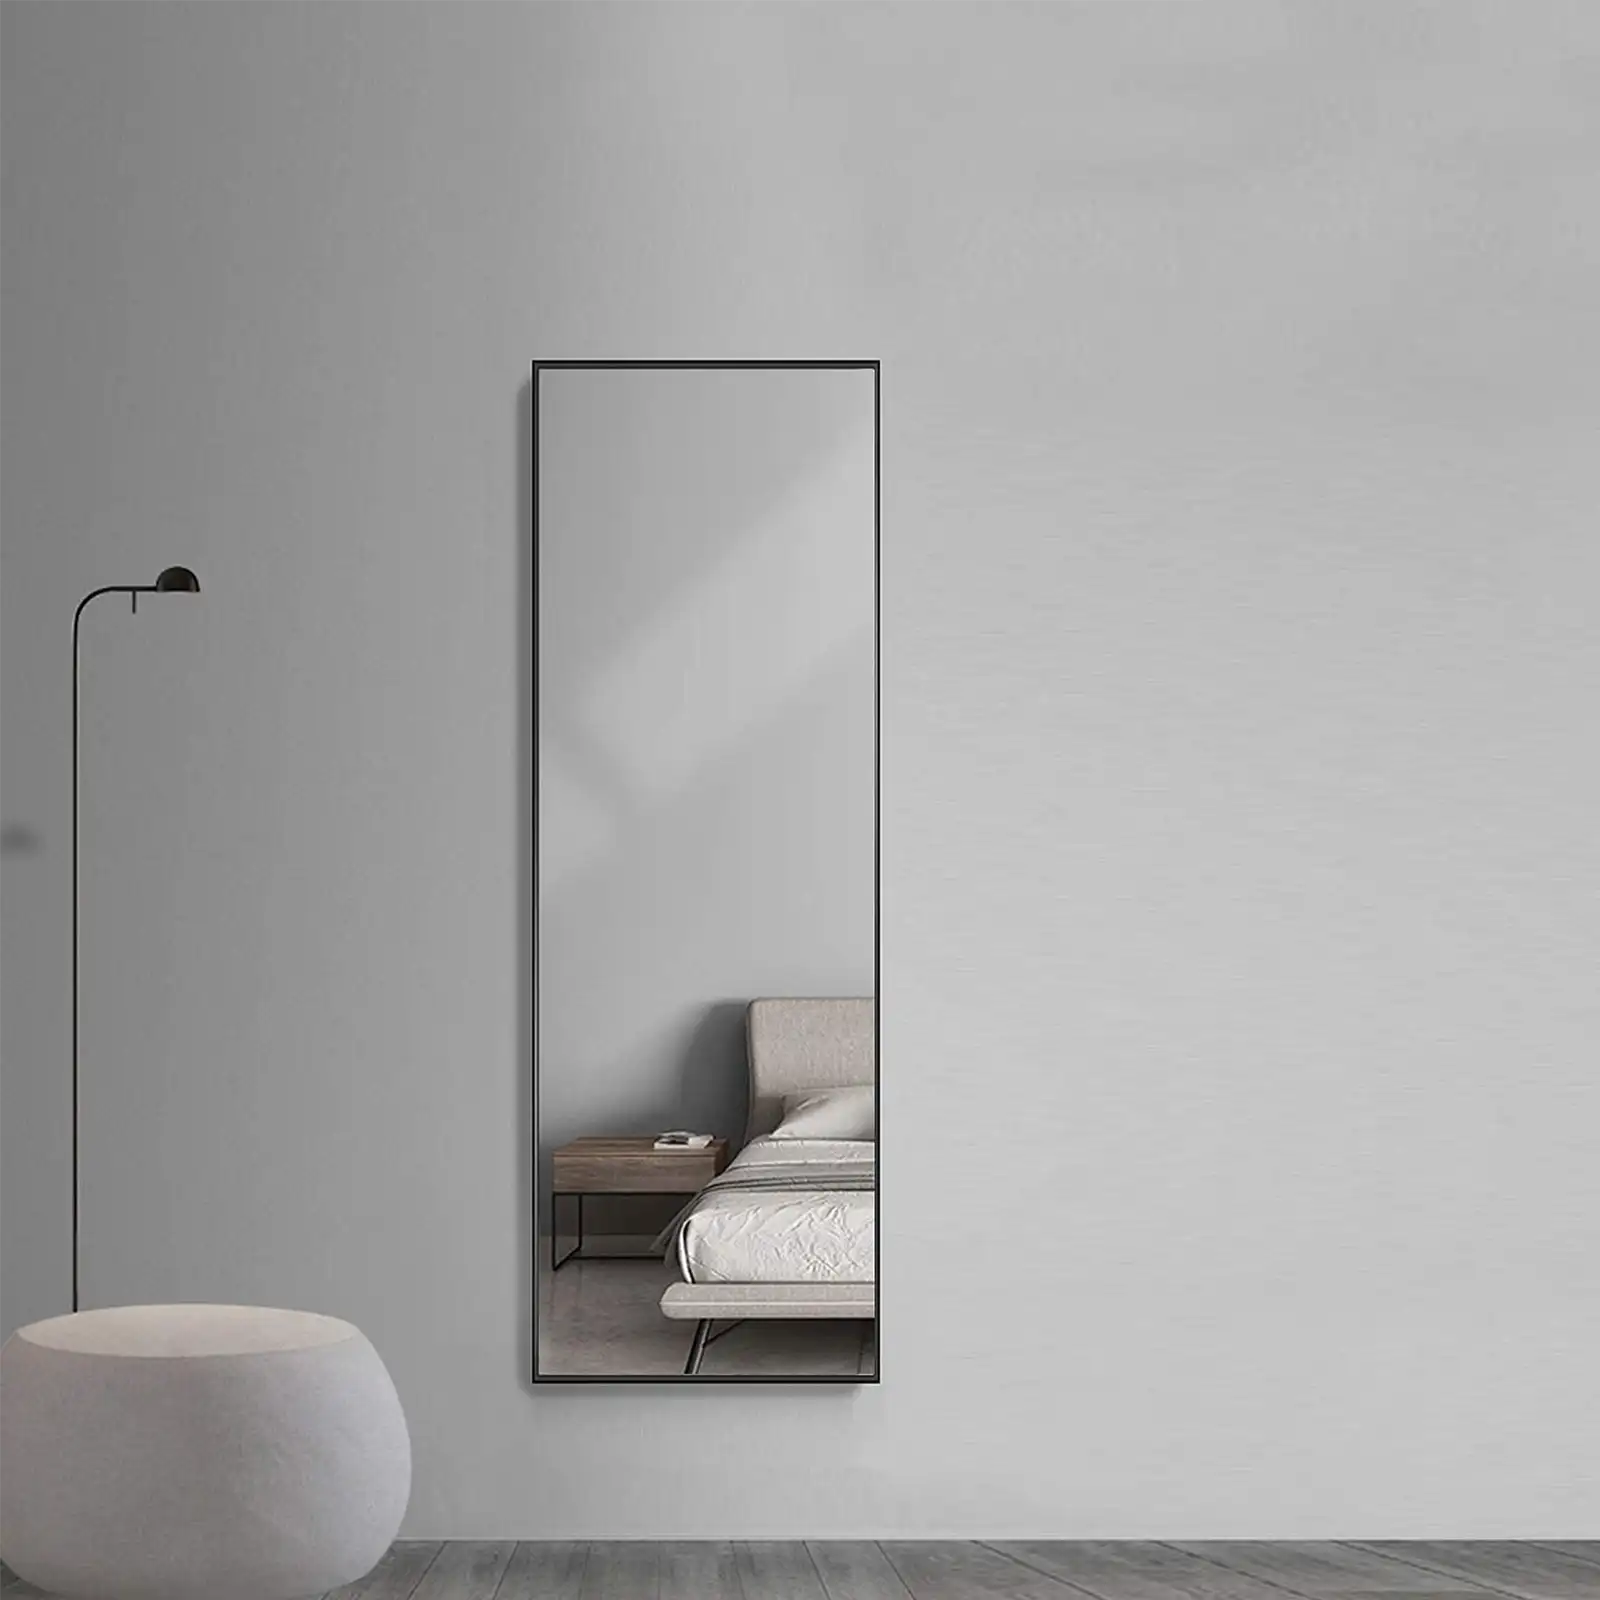 3 colors Wall Mirror, Floor Mirror , Wall-Mounted Mirror, Rectangular Mirror with Metal Frame, Large Dressing Mirror, Hangs Vertical